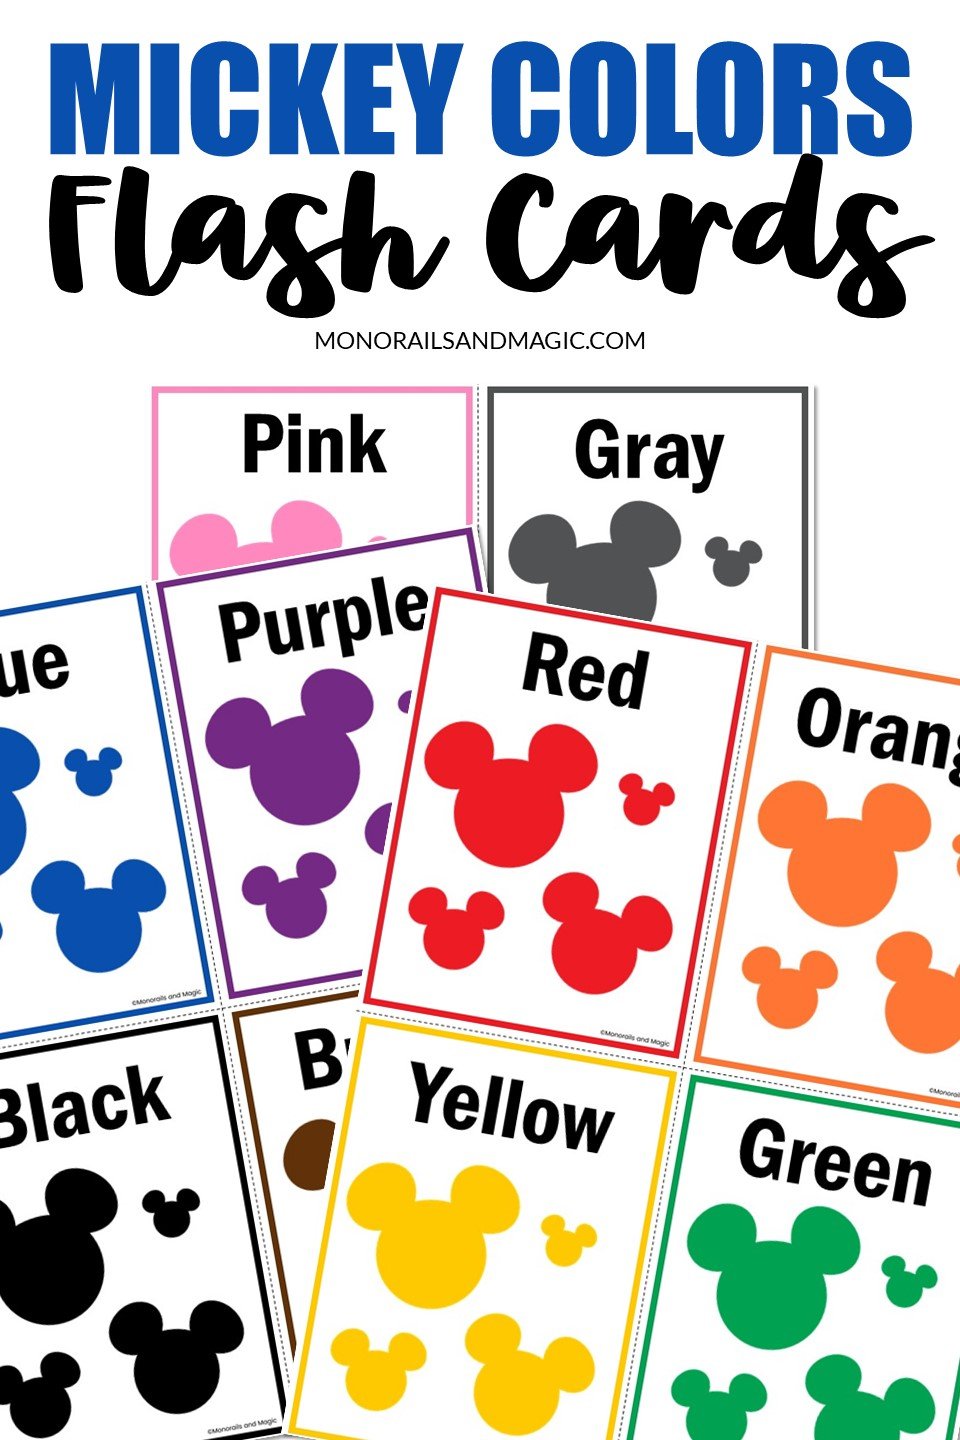 Free printable Mickey flash cards in 12 colors.